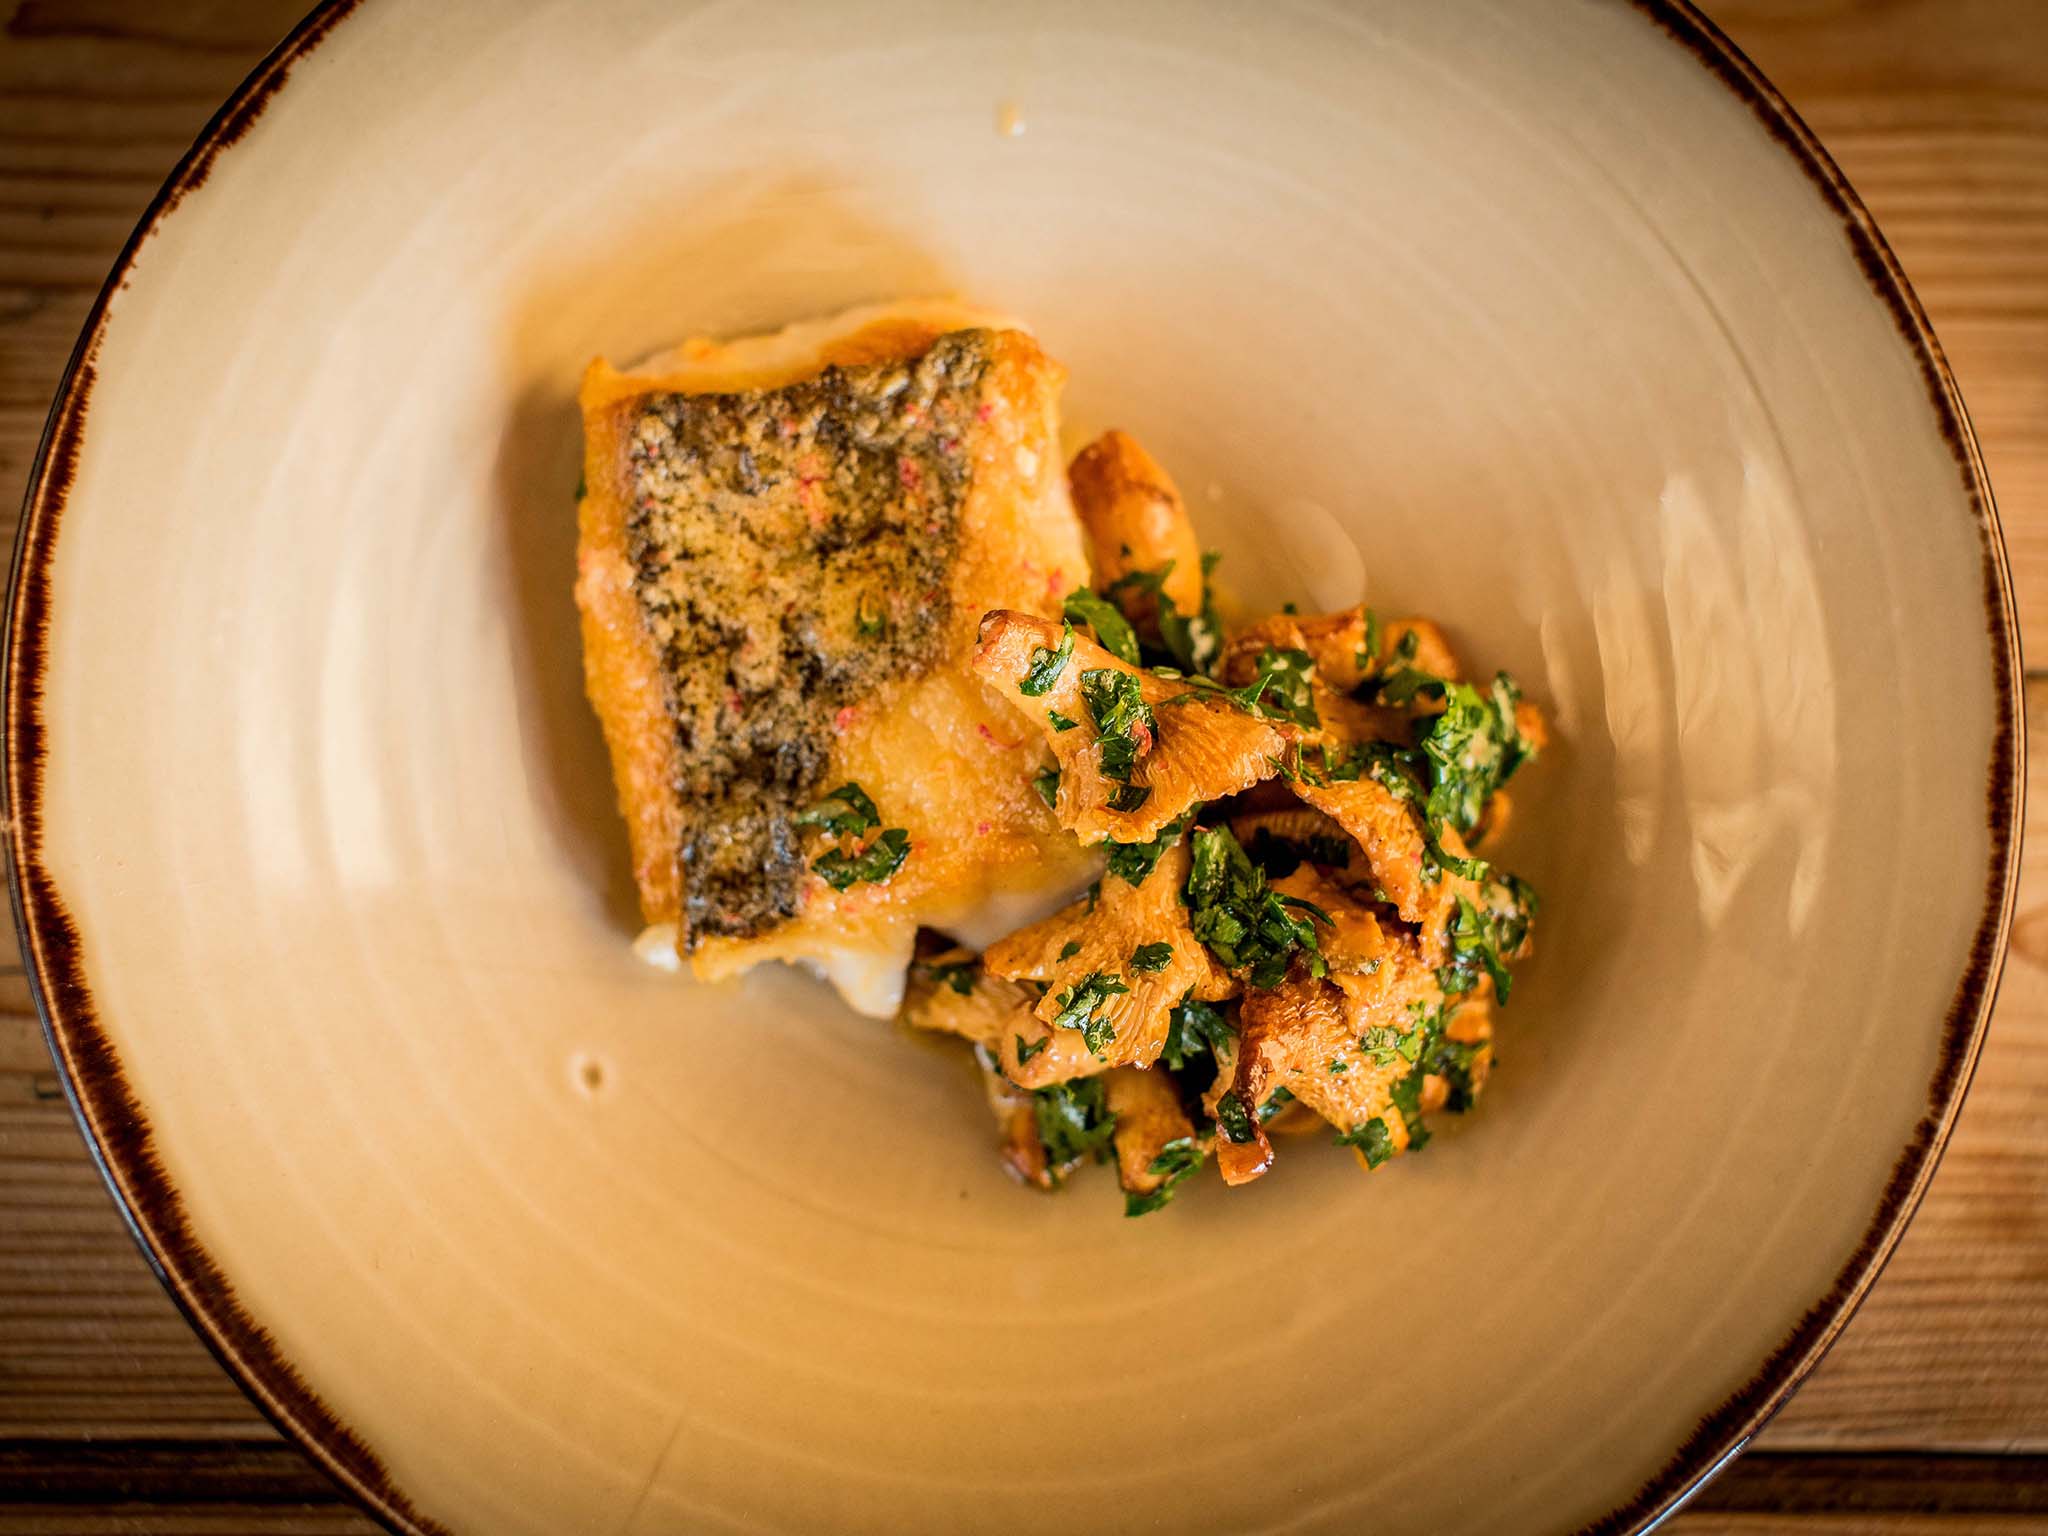 Cornish tasty: this dish will catch you out with its simplicity